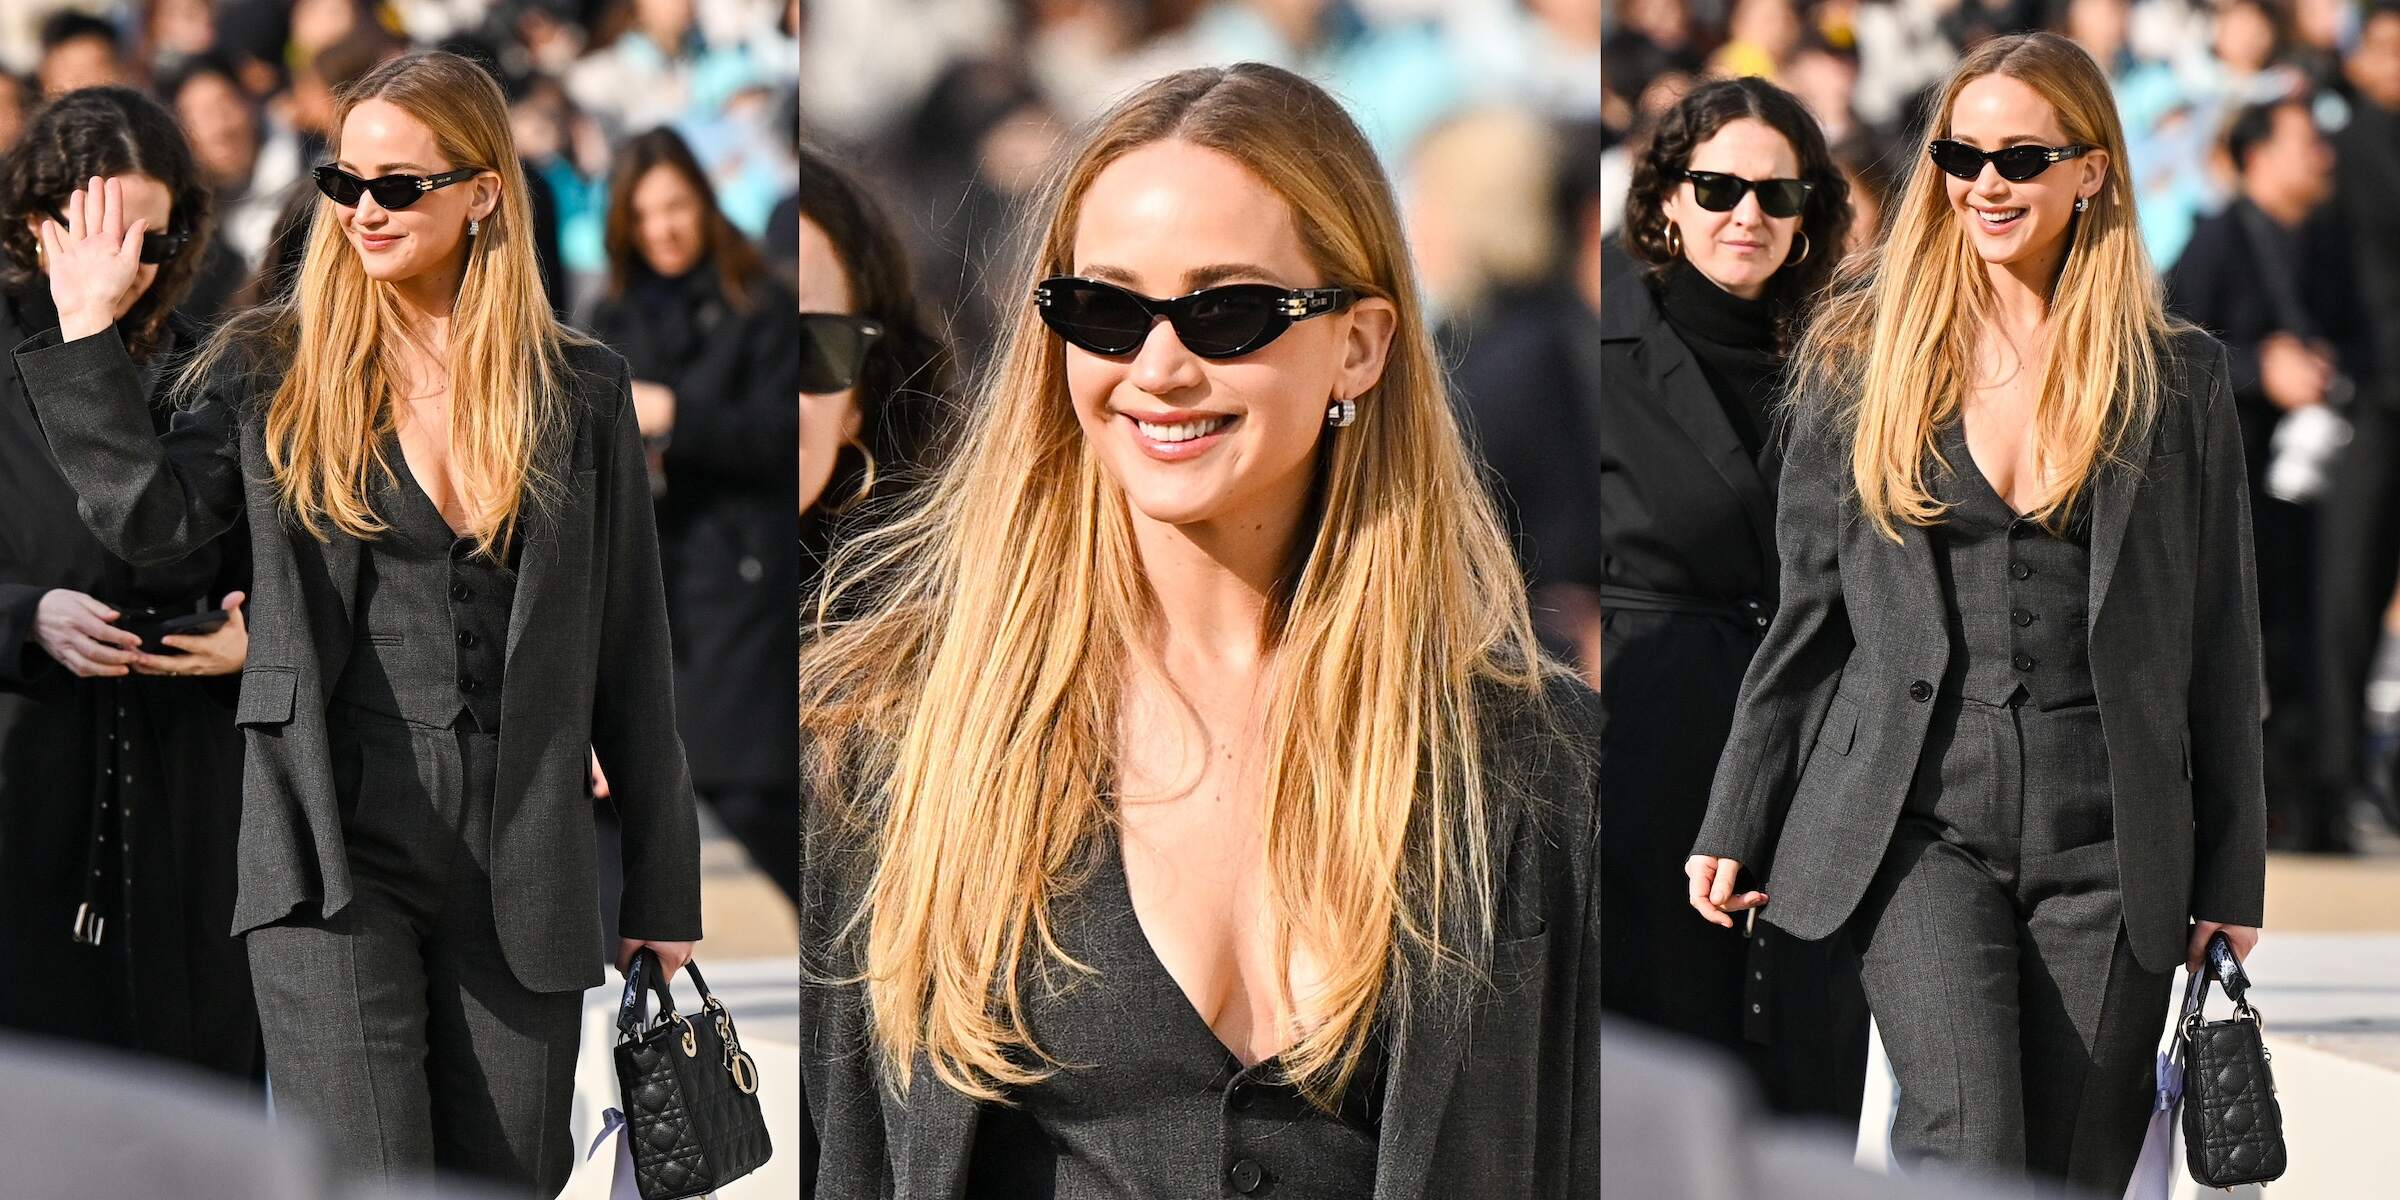 Actress Jennifer Lawrence waves to fans and wears a business-inspired black and gray outfit while walking to the Christian Dior fashion show in Paris, France